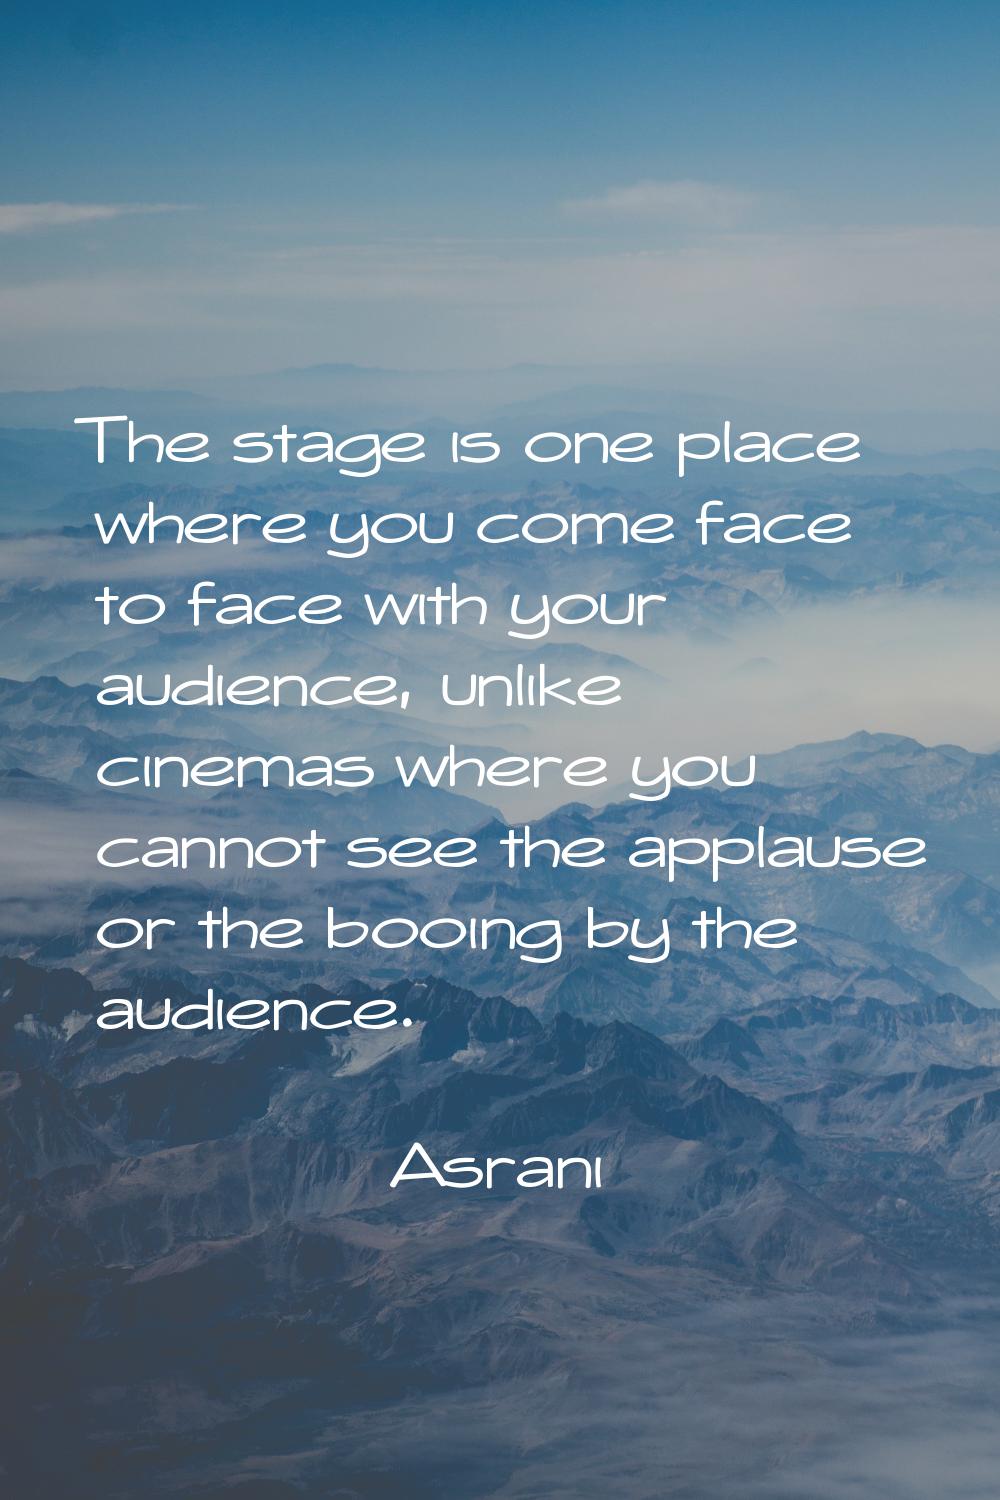 The stage is one place where you come face to face with your audience, unlike cinemas where you can